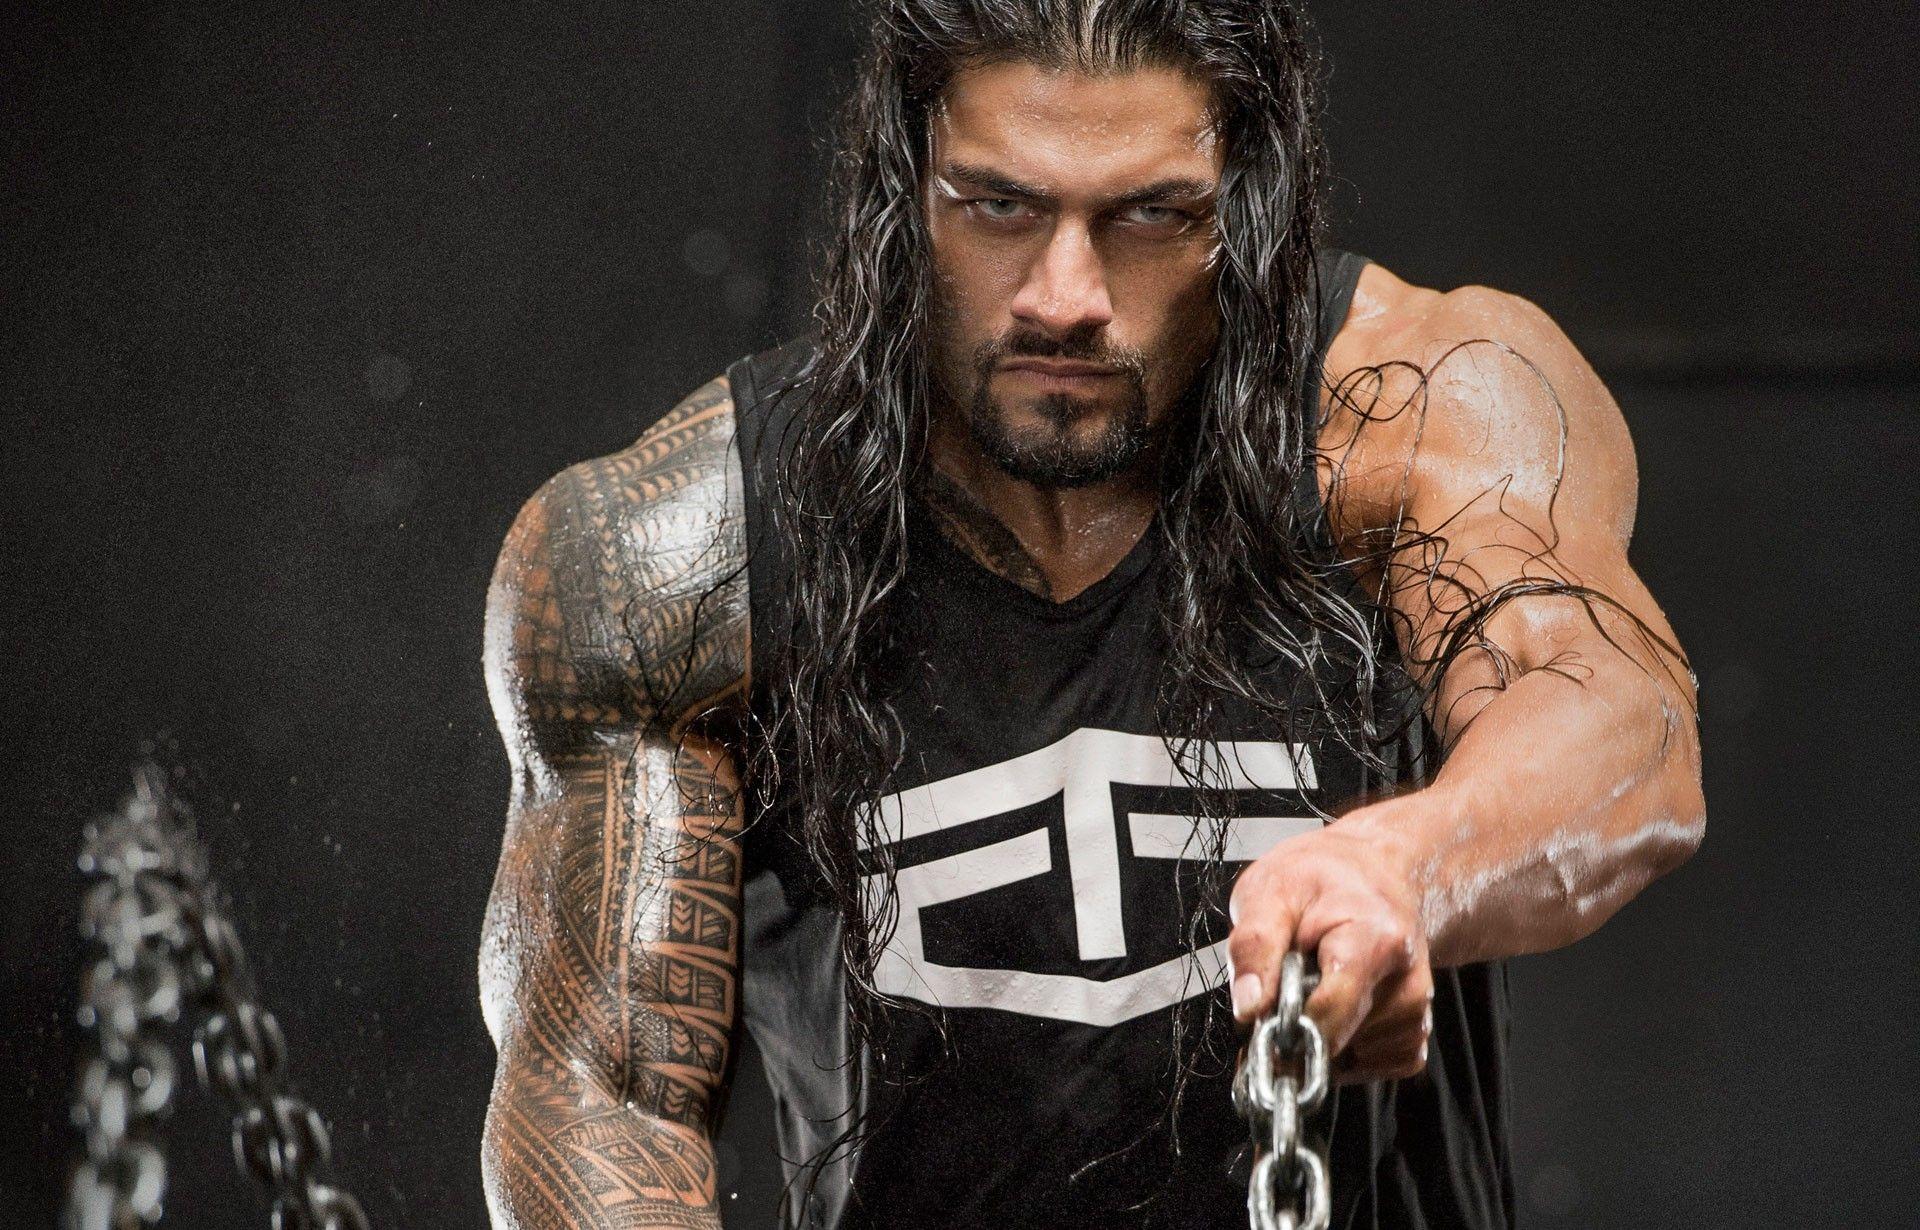 Awesome Photo Of Wwe Roman Reigns Download In HD Image